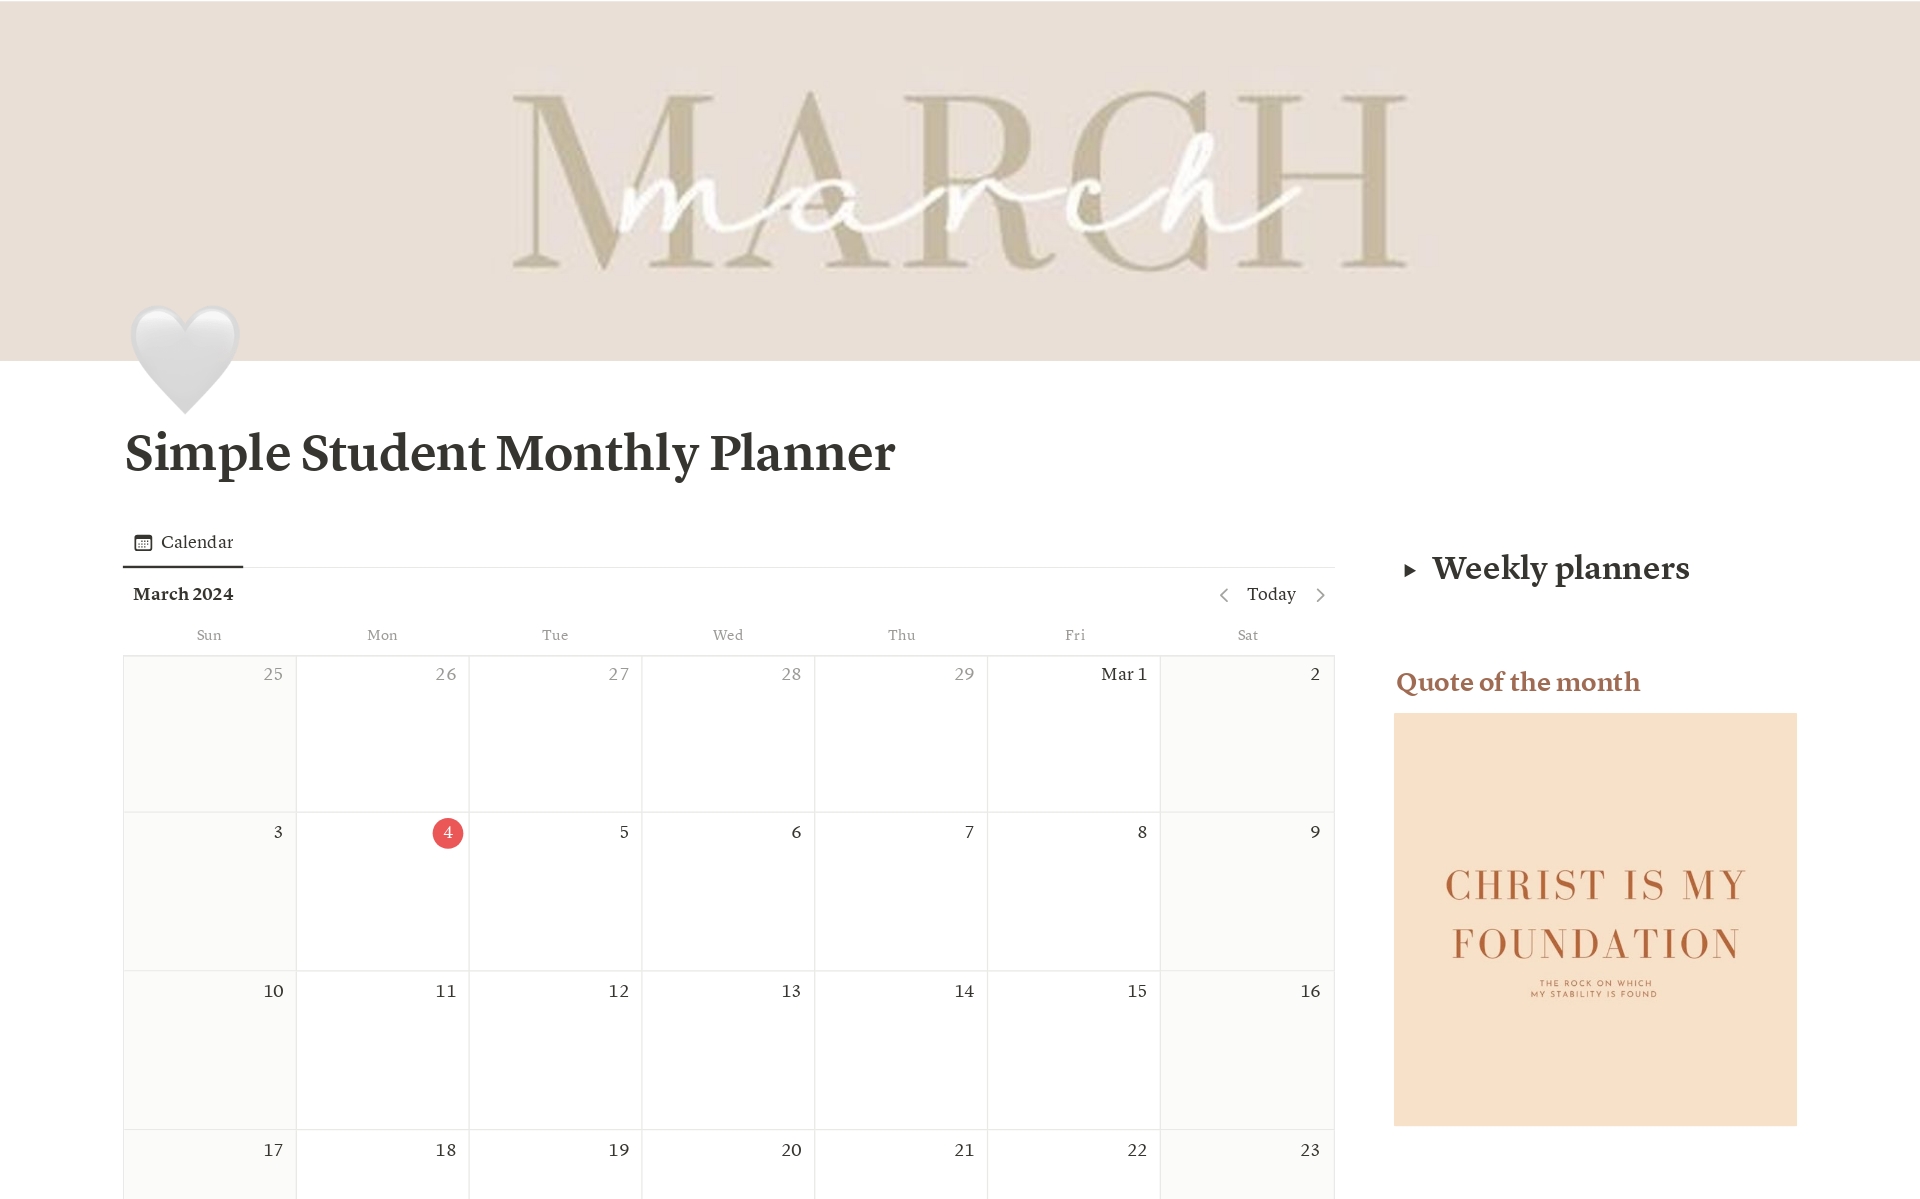 This template was designed for students looking for a simple monthly planner.